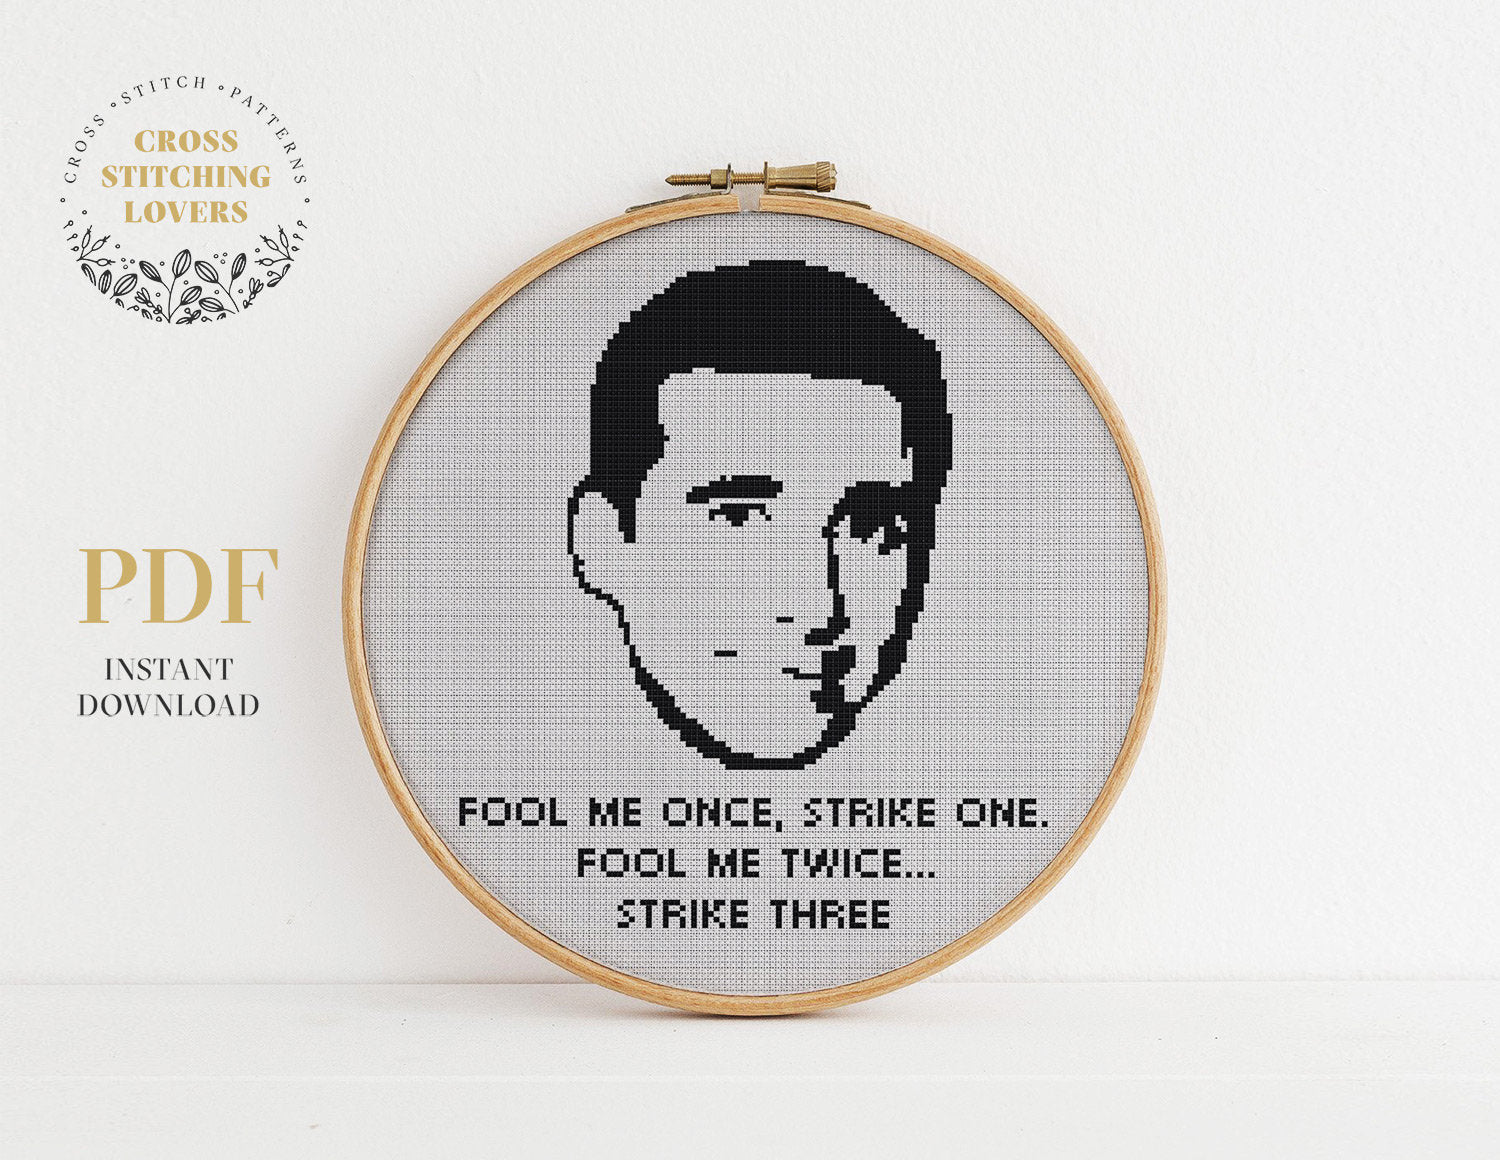 The Office, Michael Scott funny quote - Cross stitch pattern